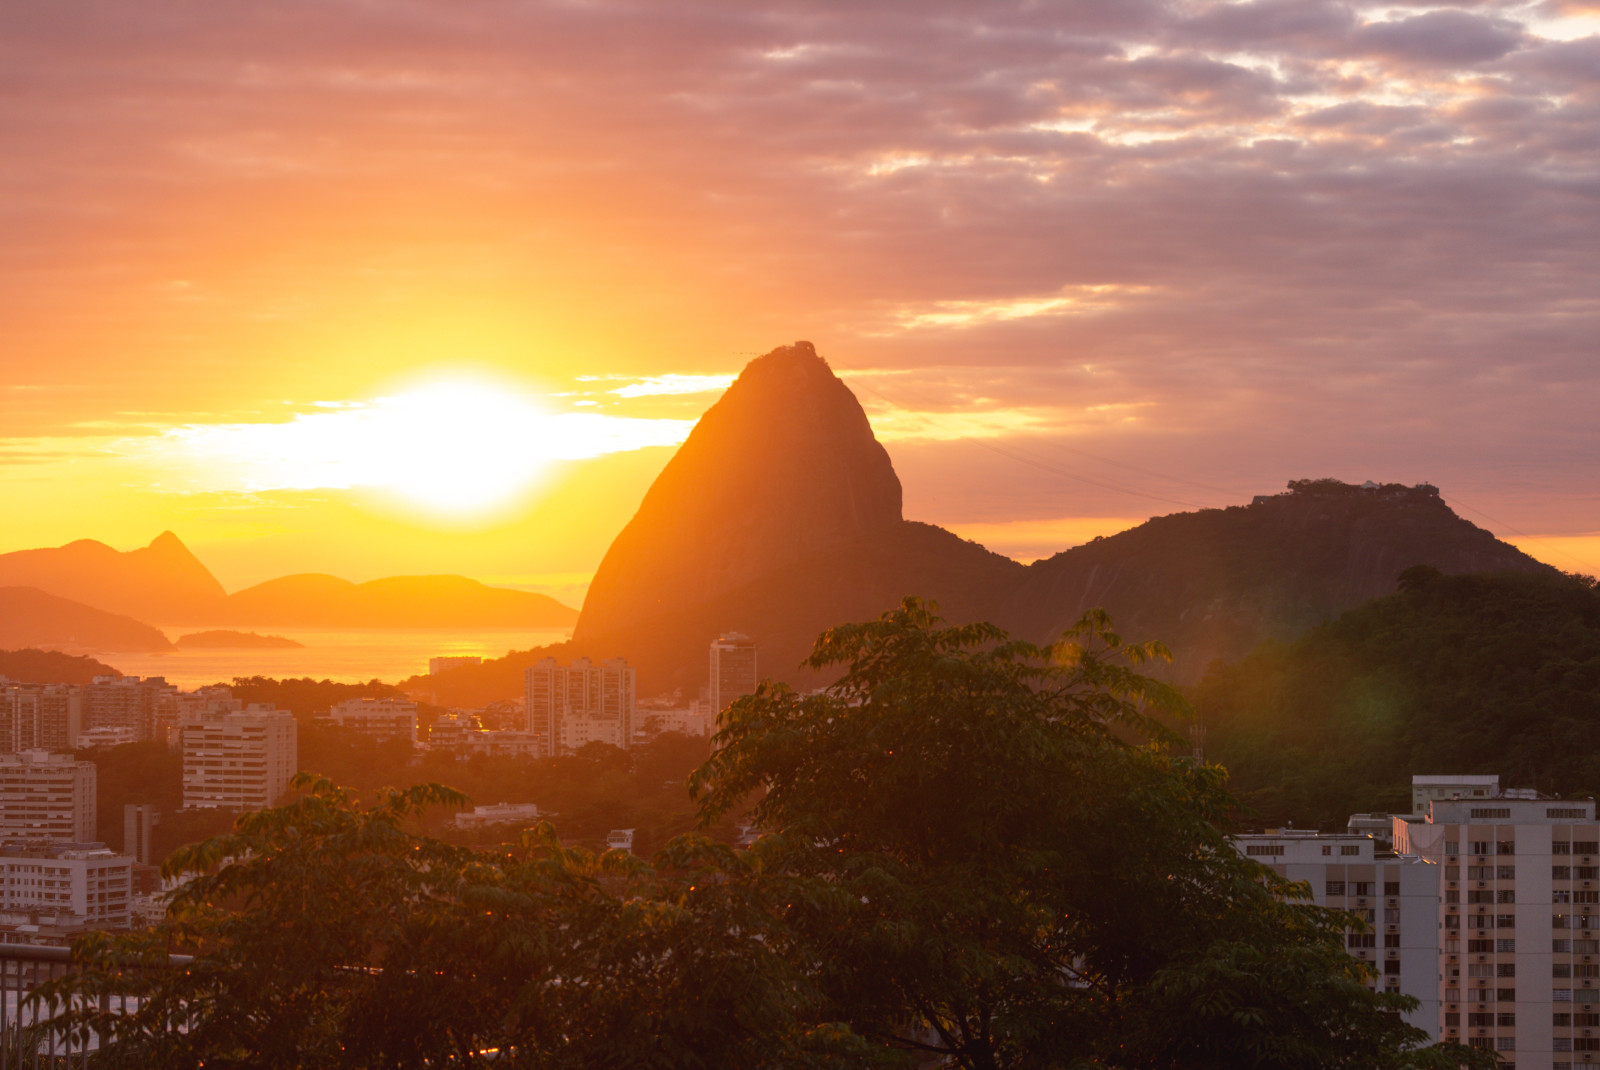 View of the sun rising over Sugarloaf Mountain in Brazil